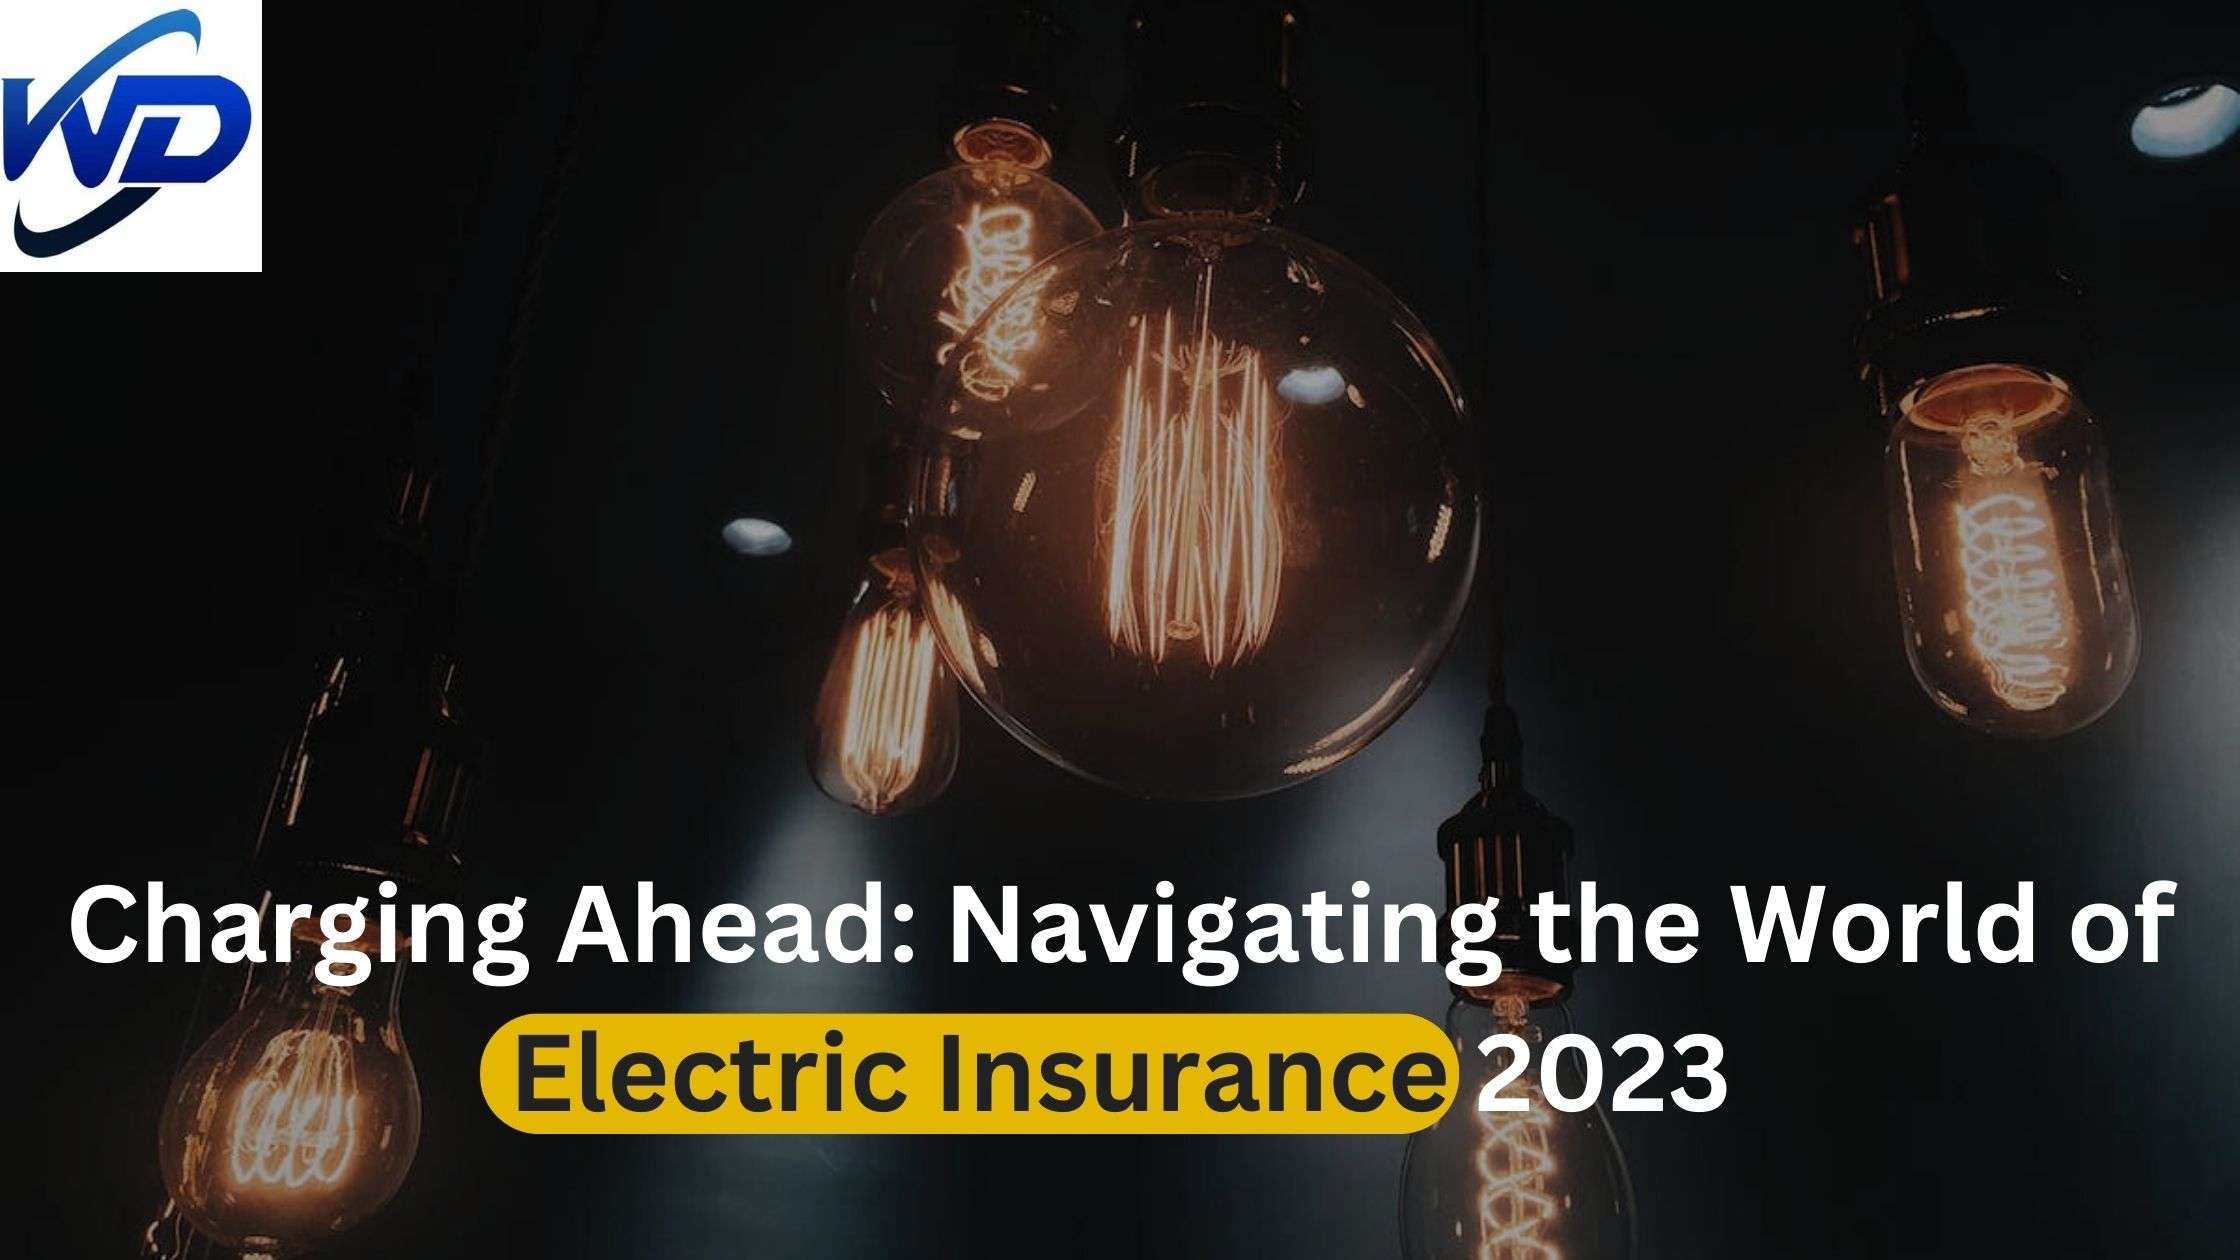 Electric Insurance: Navigating the World 2023